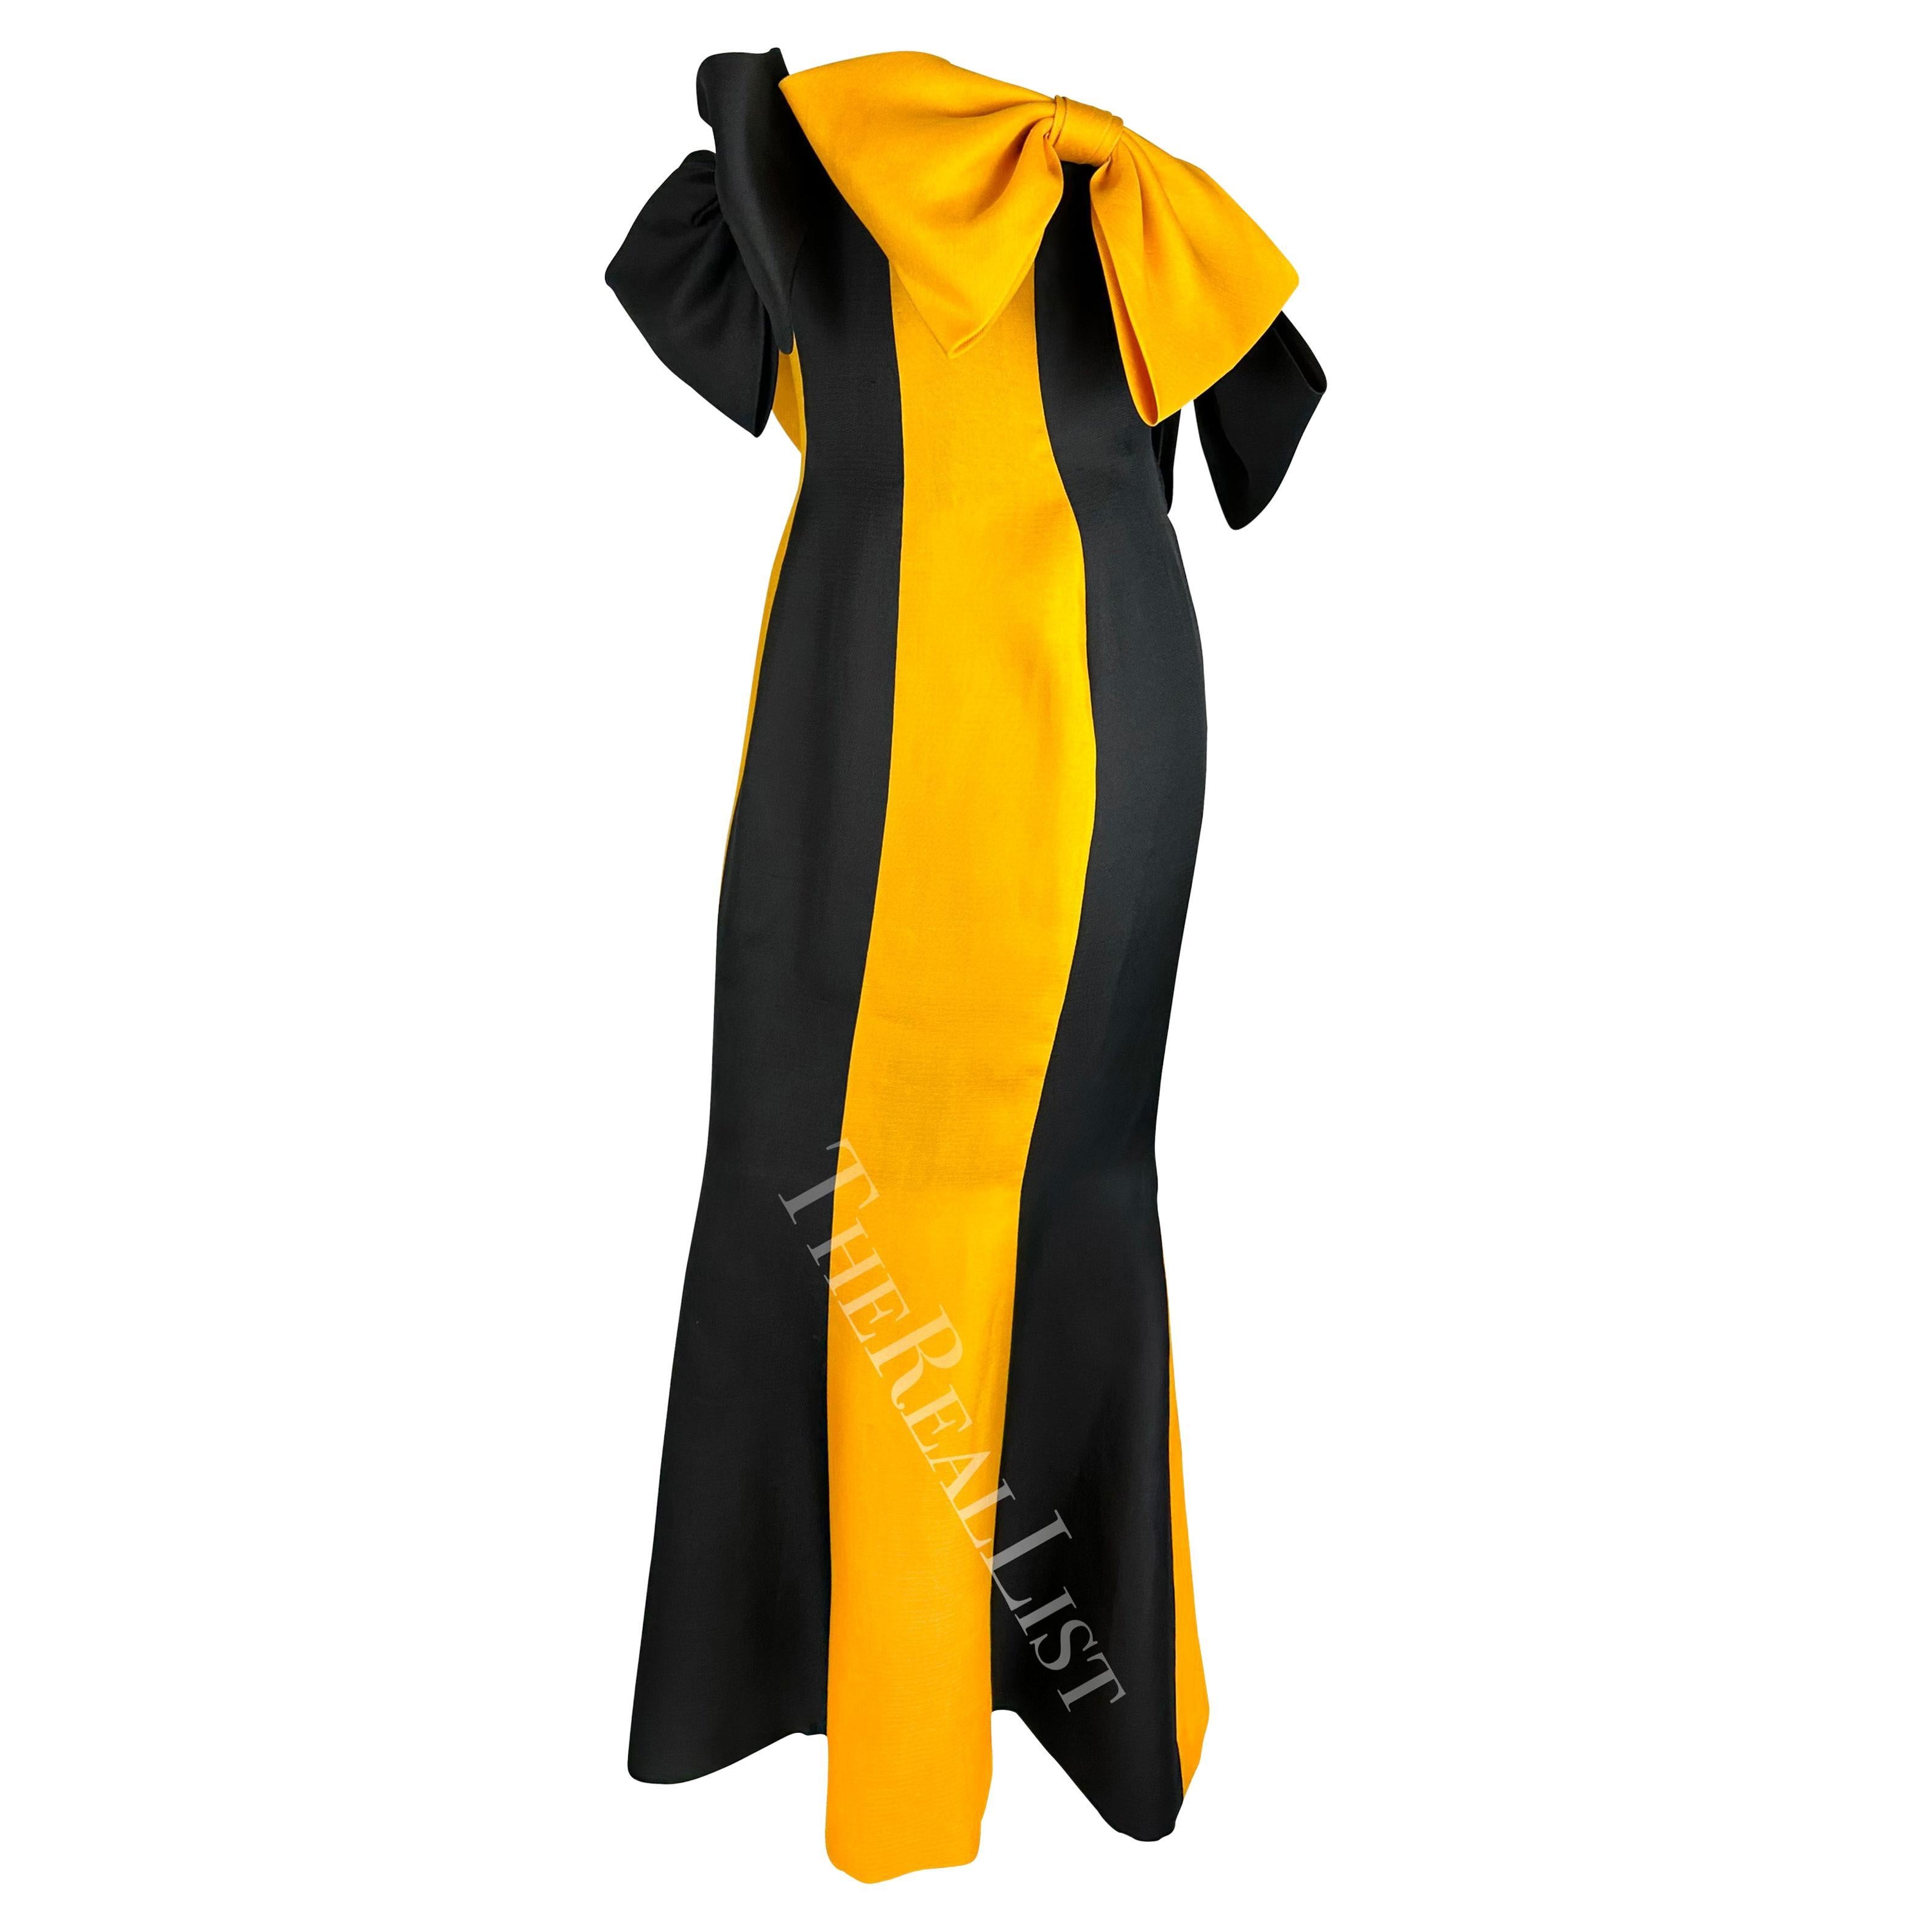 S/S 1987 Givenchy Haute Couture Runway Yellow Black Bow Trumpet Flare Gown For Sale 1